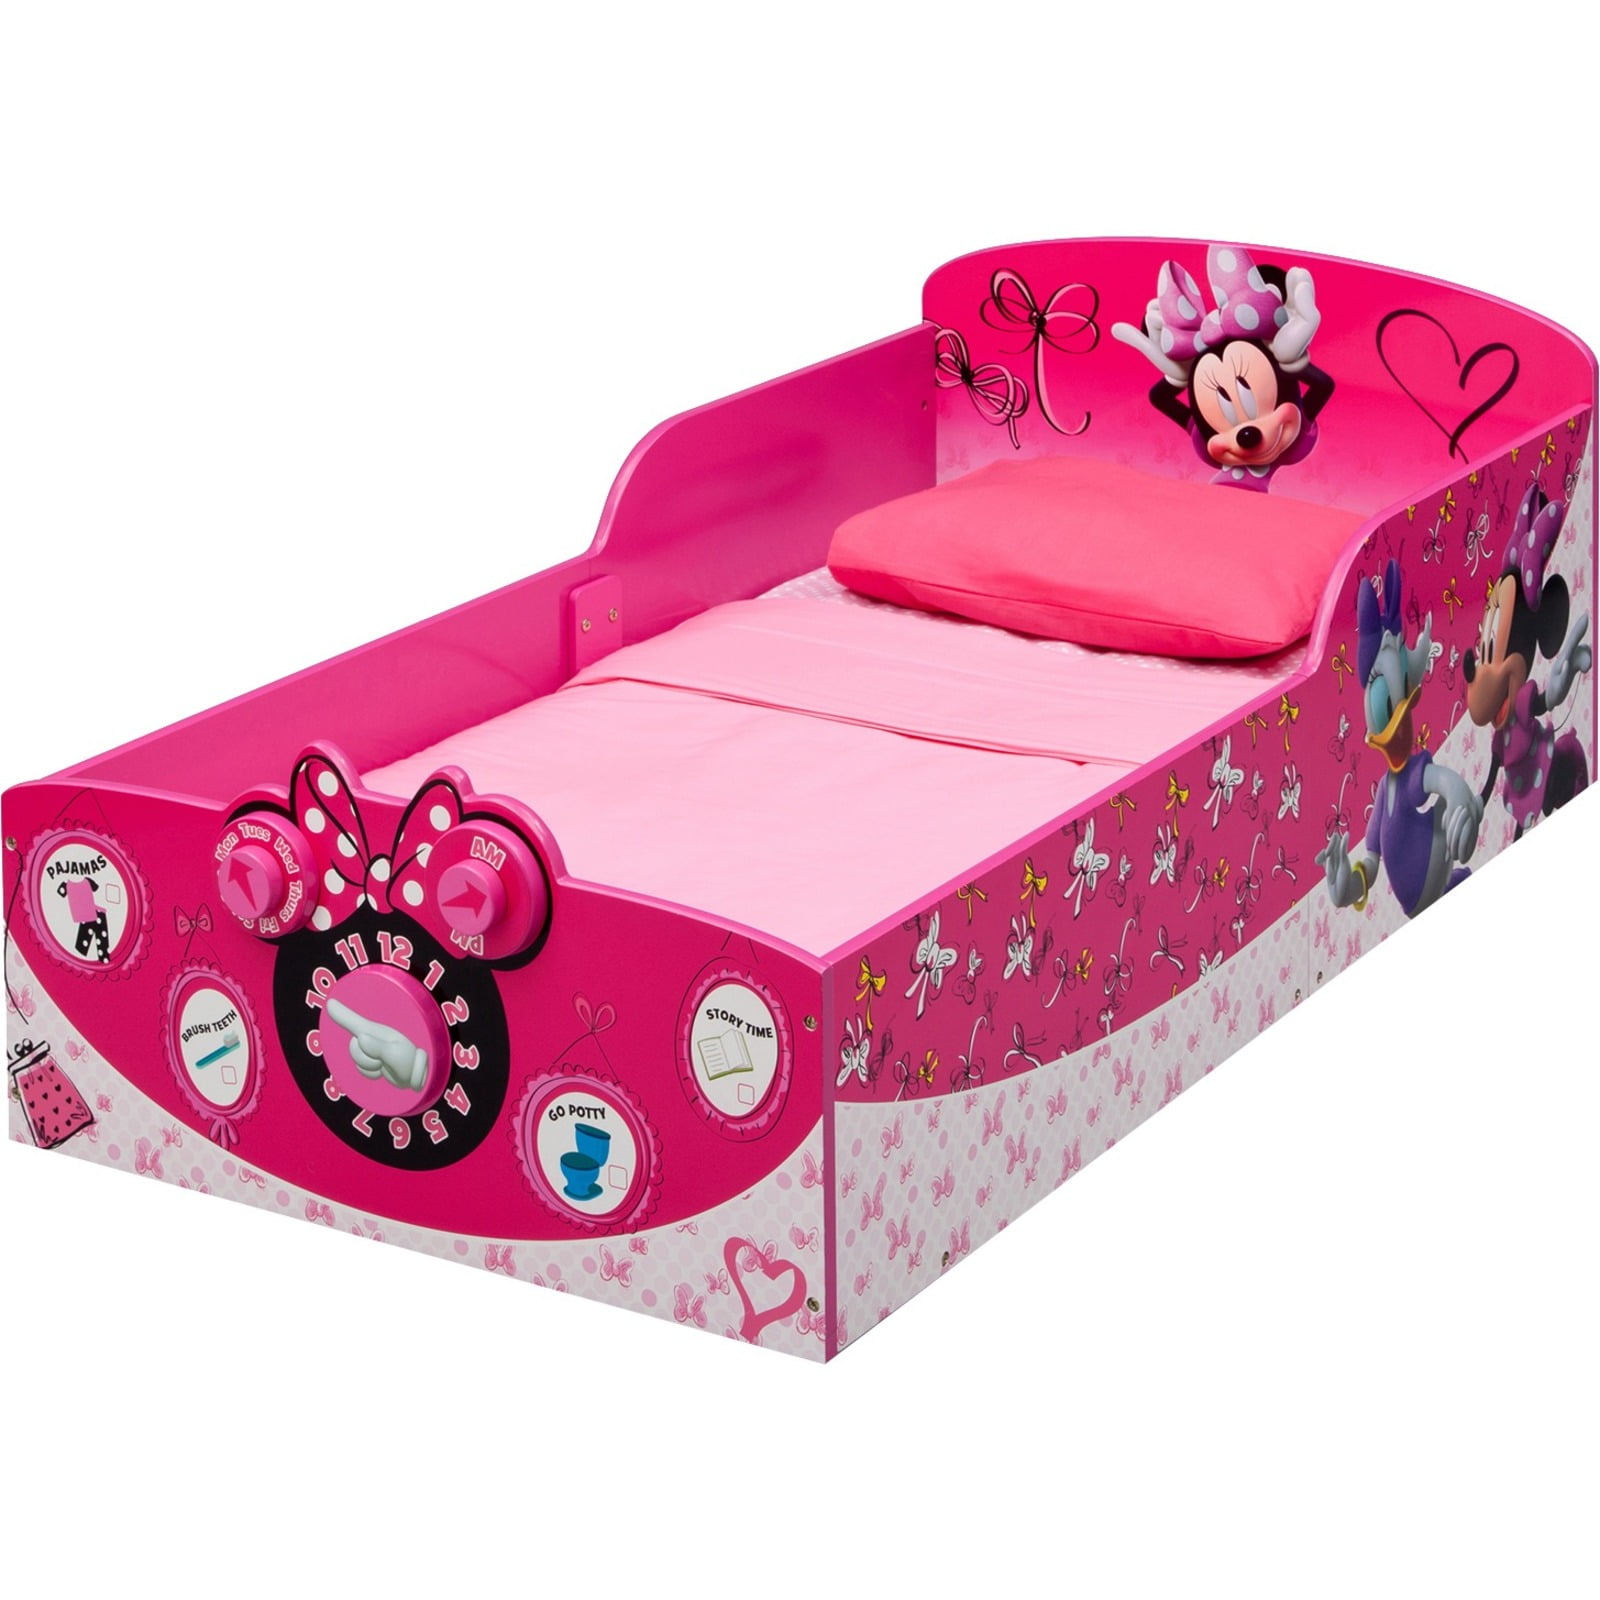 NEW MINNIE MOUSE TODDLER BED WITH PROTECTIVE SIDE PANELS PINK BLUE NEW FREE P+P 